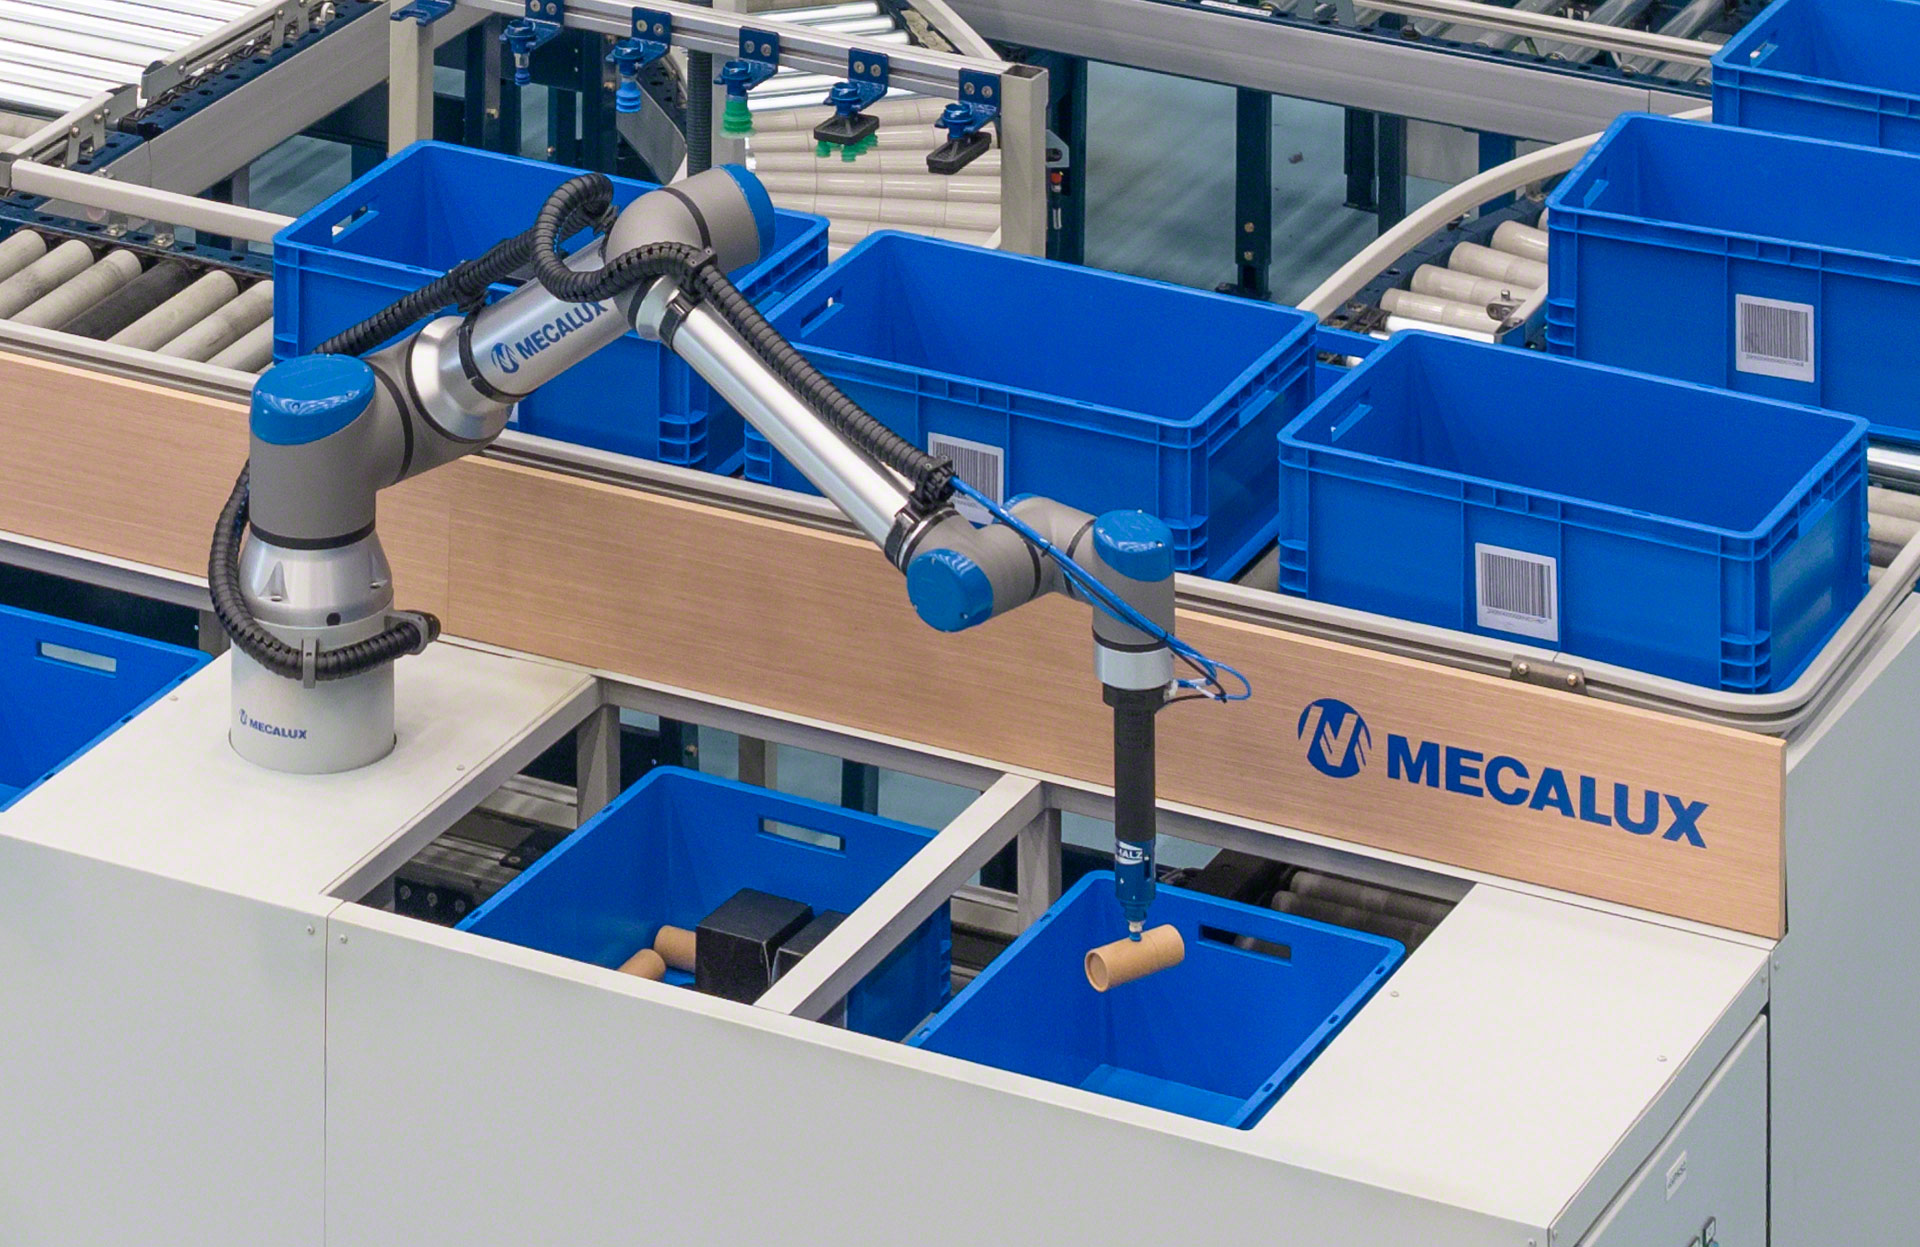 Mecalux’s picking robot completely automates order picking